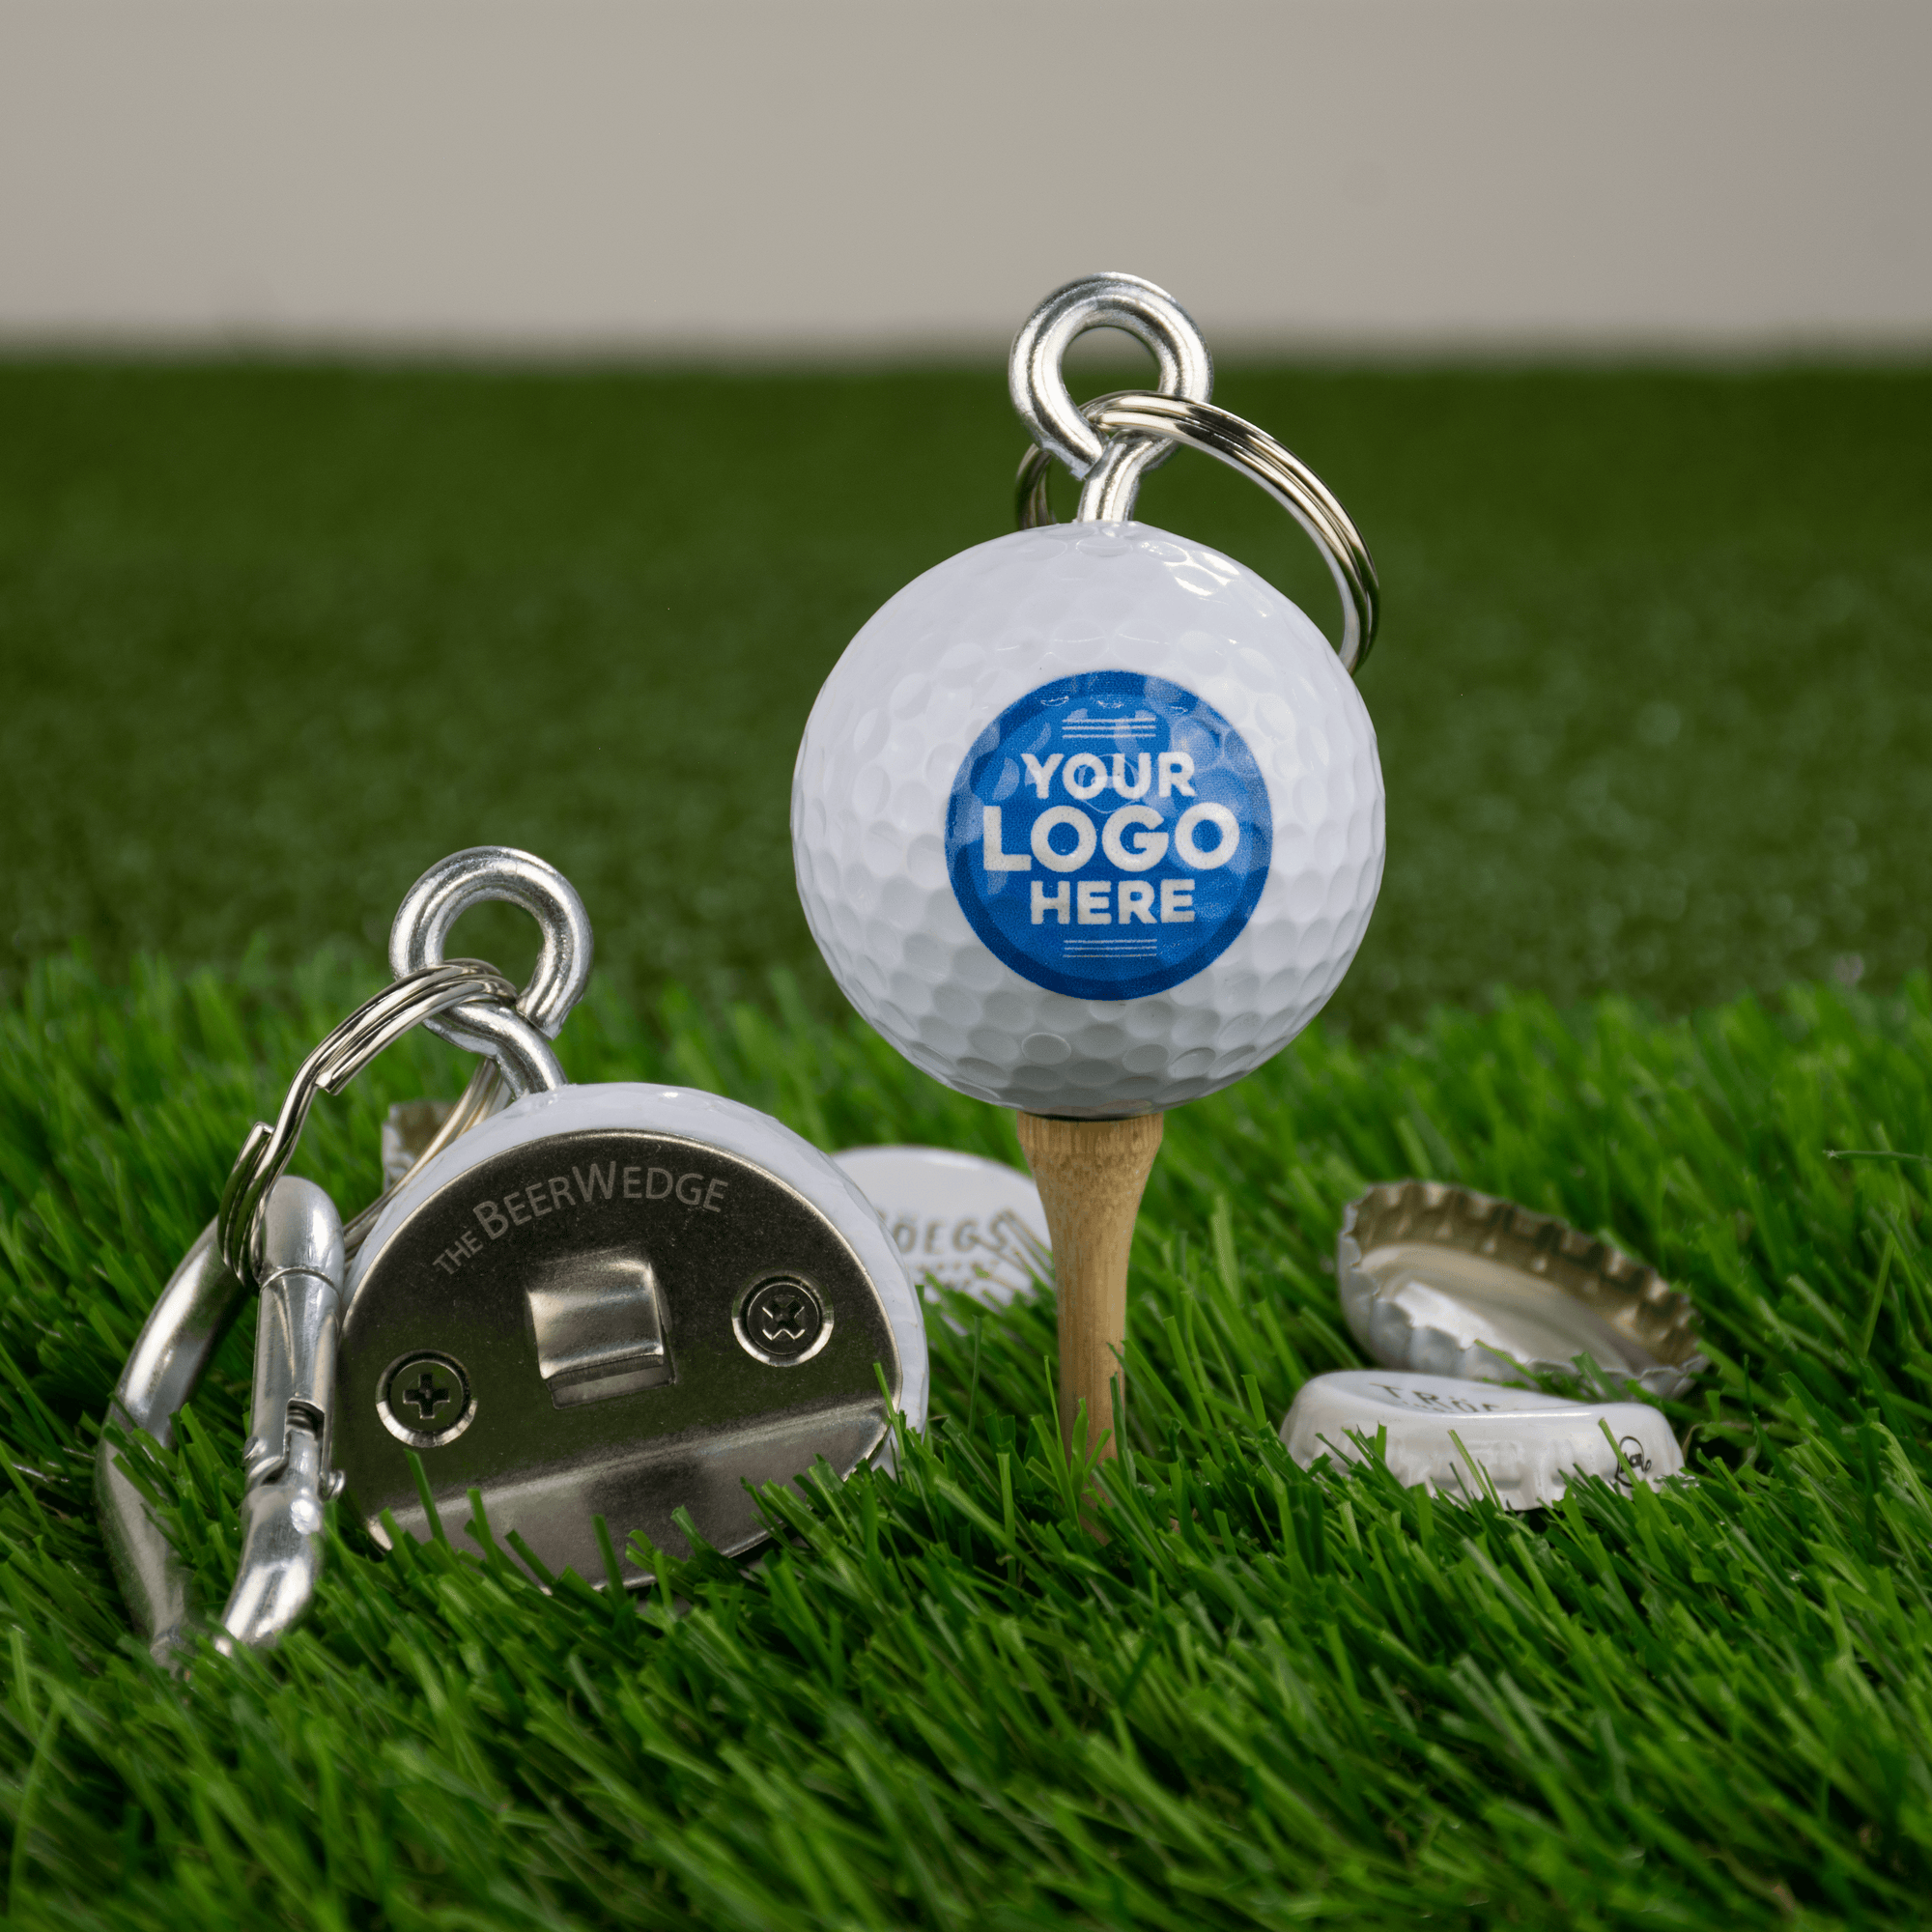 65 Best Golf Tournament Gifts in 2023 - Groovy Guy Gifts